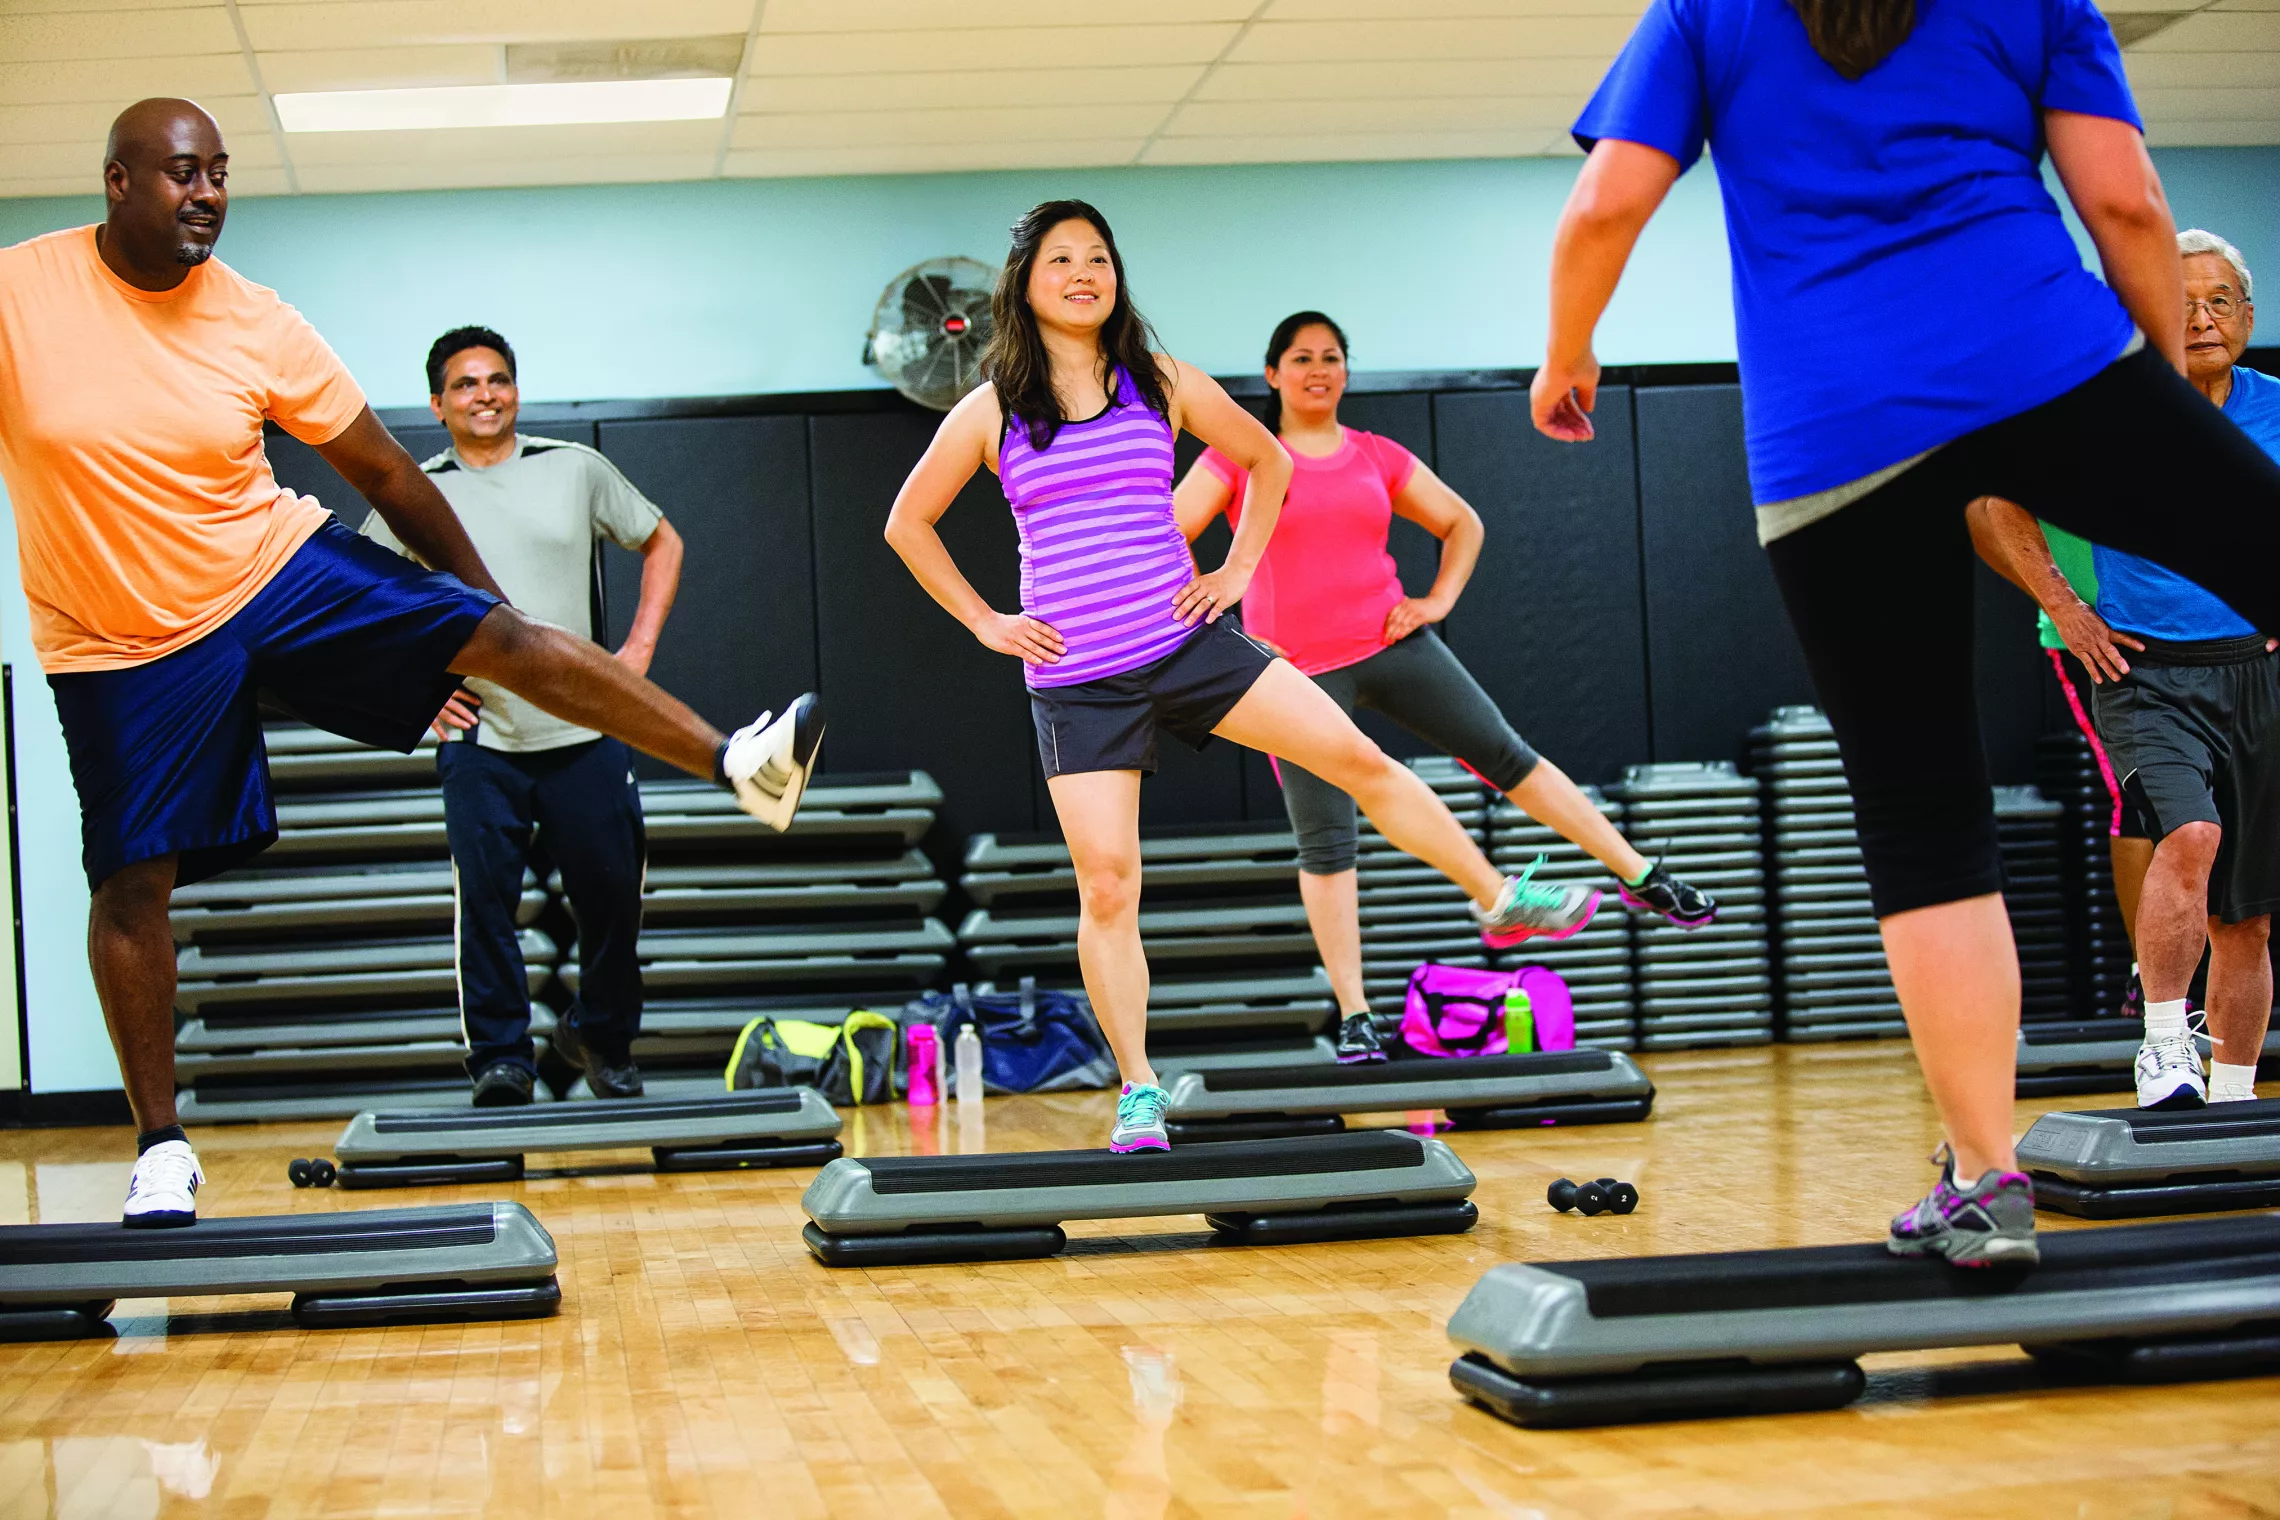 Group of adults in a fitness class